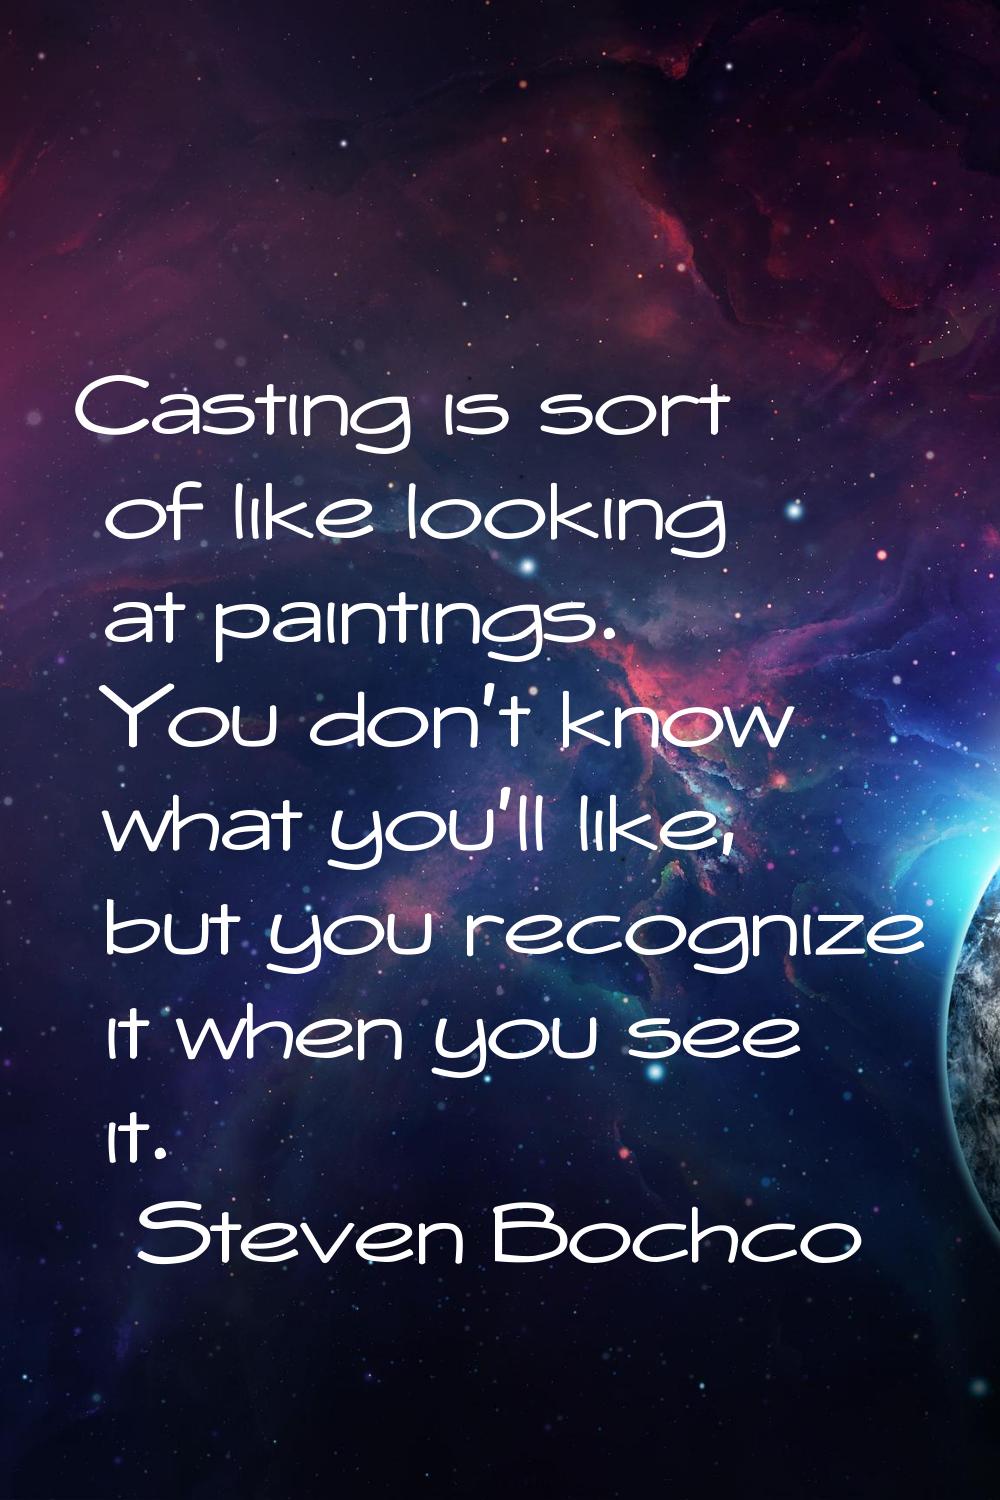 Casting is sort of like looking at paintings. You don't know what you'll like, but you recognize it